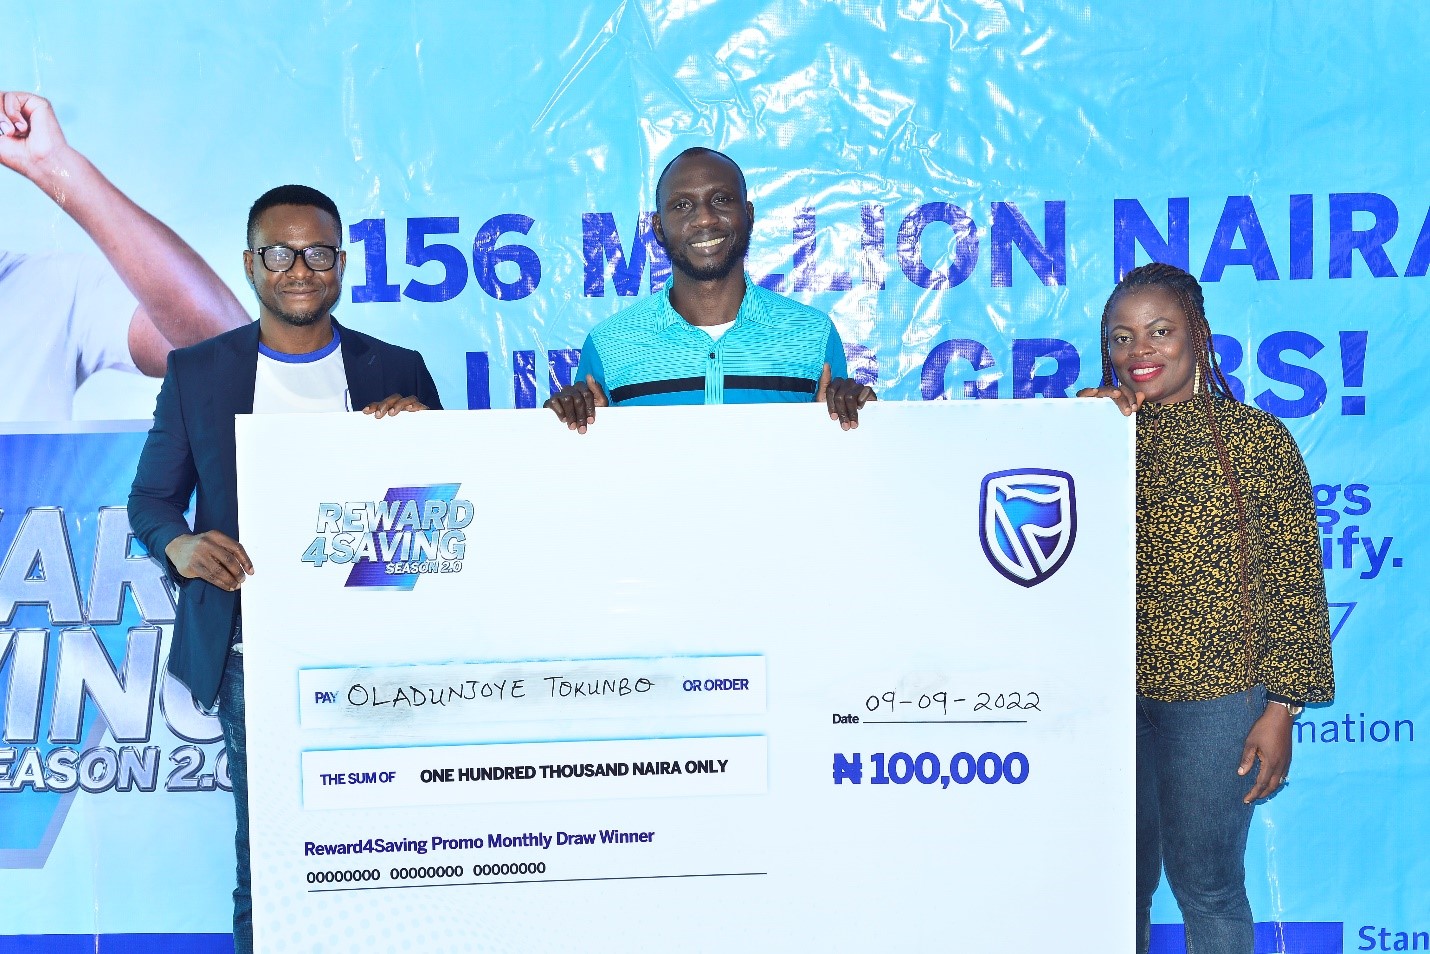 Stanbic IBTC Rewards More Nigerians with Cash Prizes At Monthly Draws